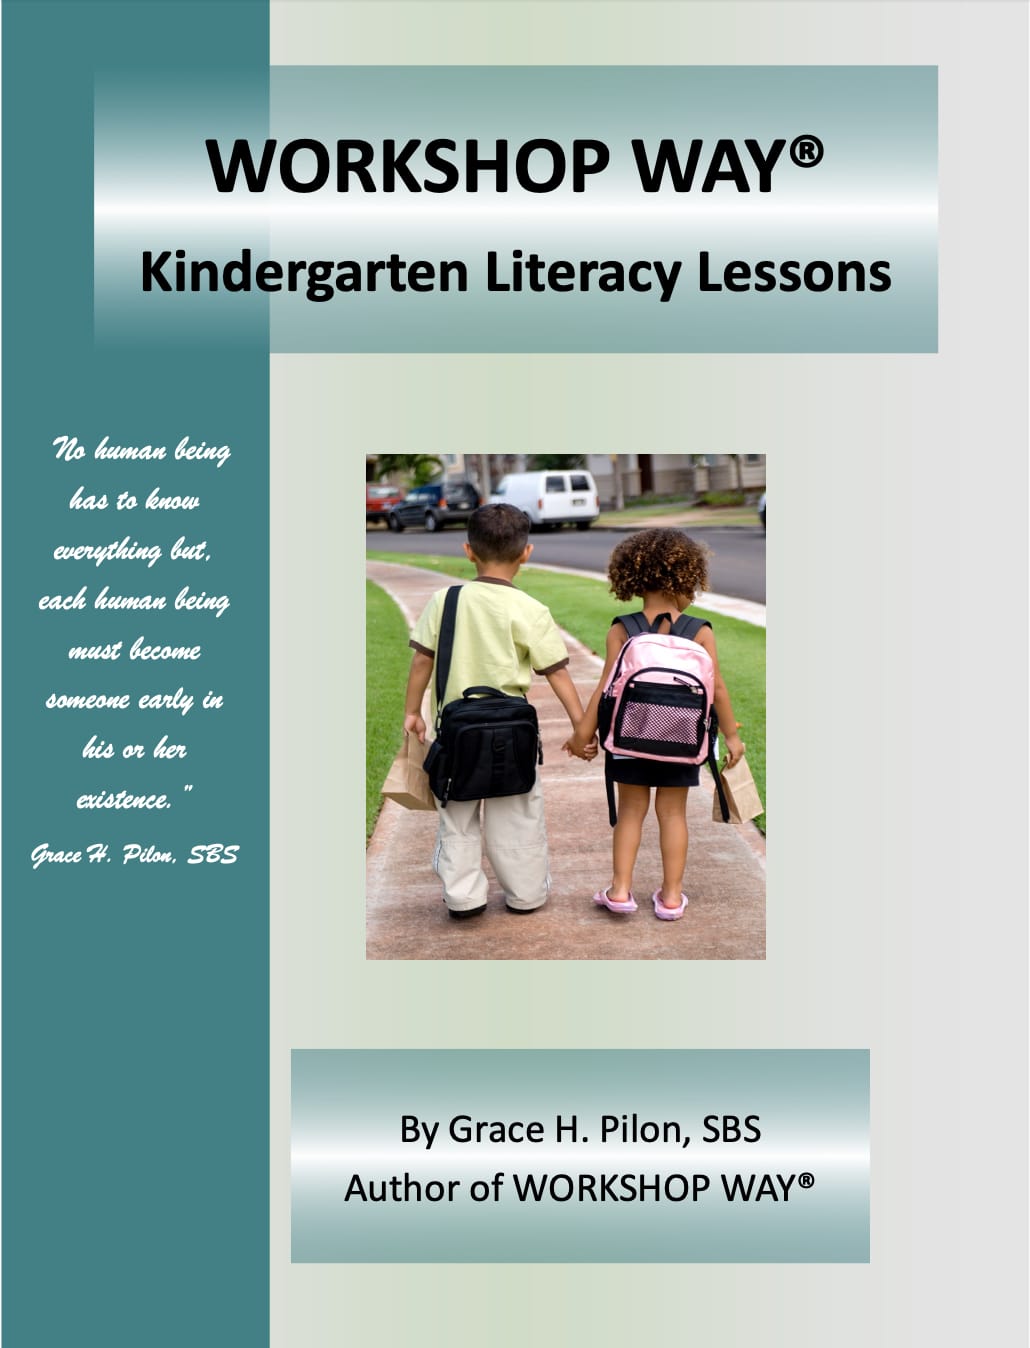 Kindergarten　Thinking　Lessons　Literacy　·　Workshop　K　and　for　Lessons　Way